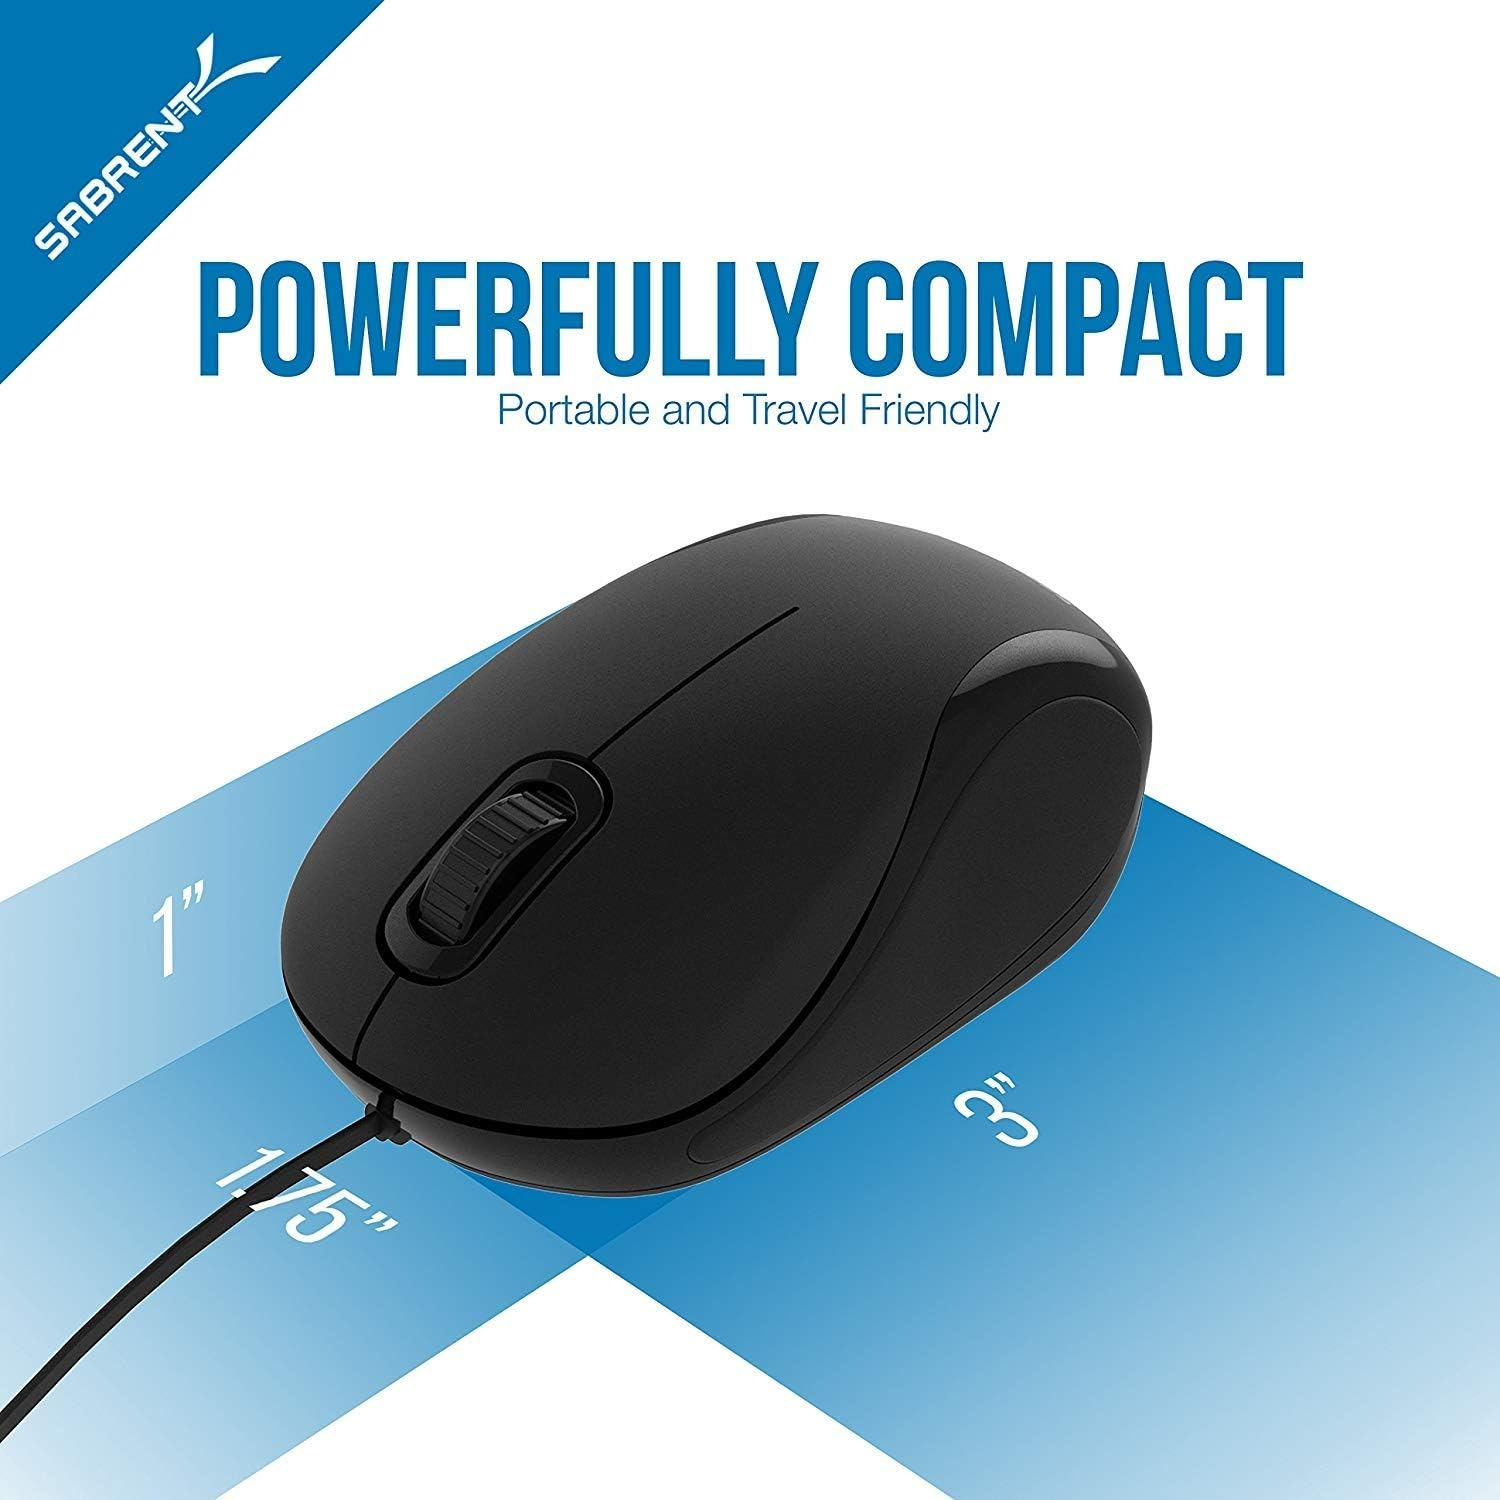 Sabrent Mini Travel USB Optical Mouse with Retractable Cable for Computers and laptops | Mac & PC Compatible (MS-OPMN)